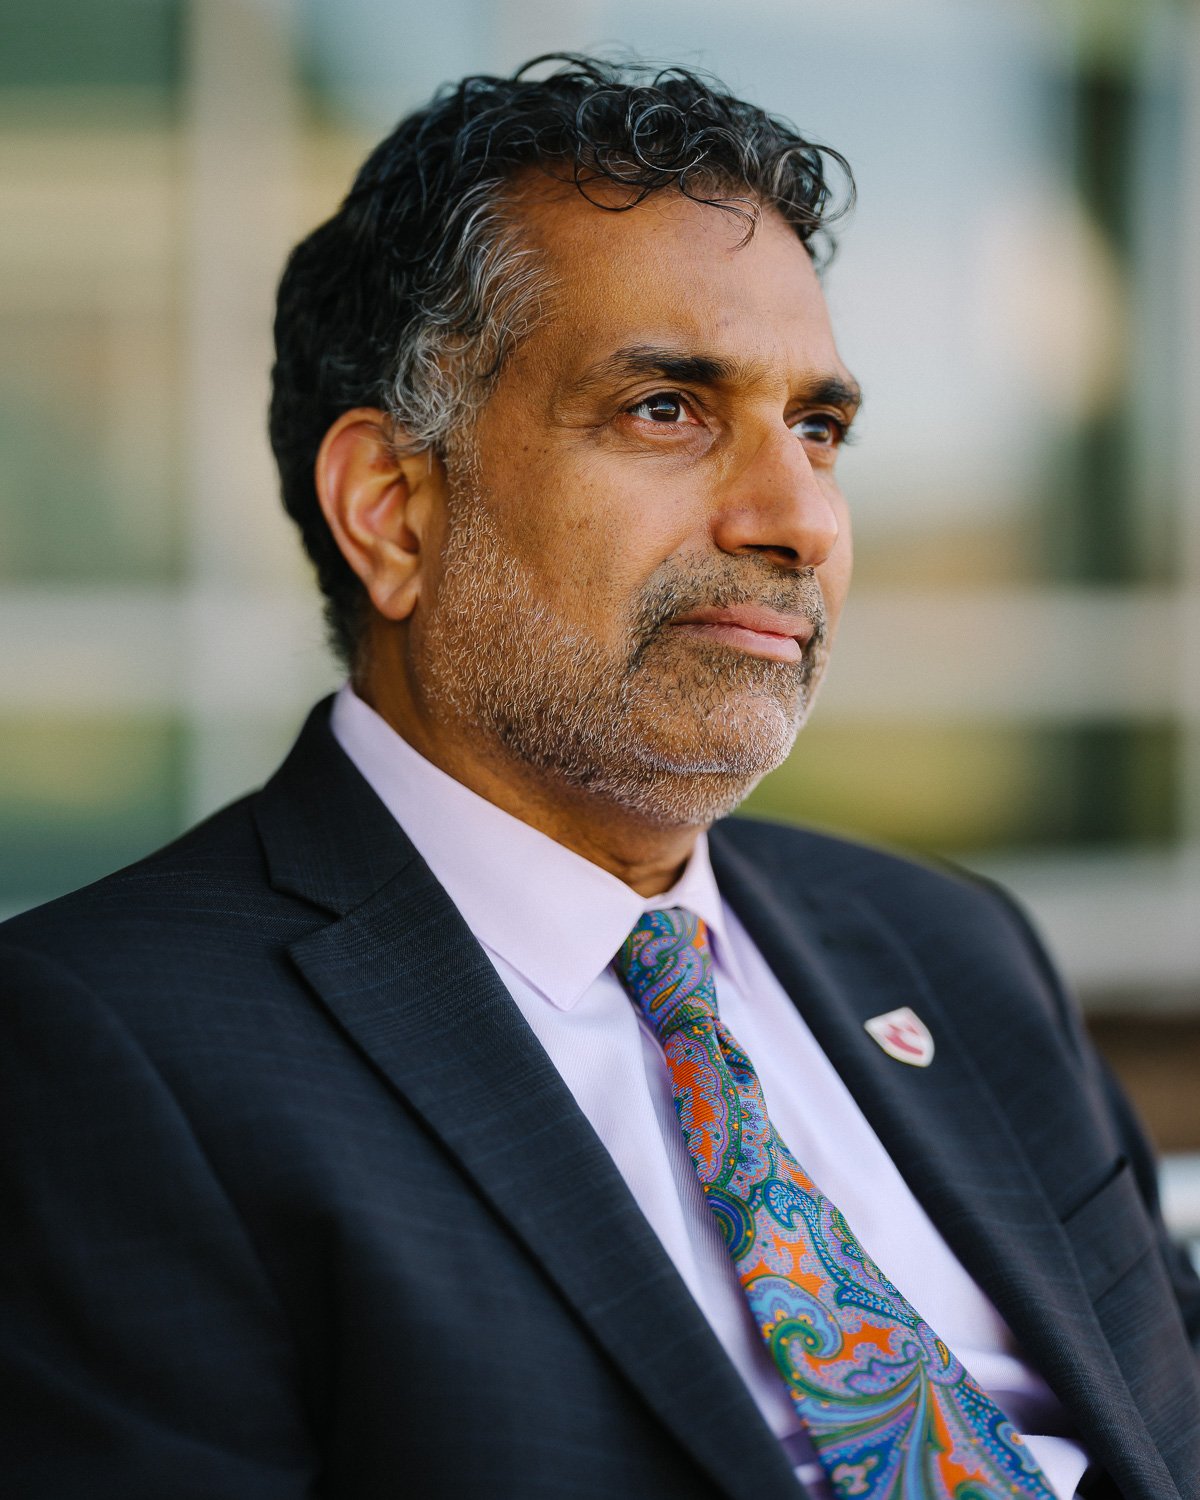  Dr. Ali Khan, Dean of the College of Public Health at the University of Nebraska Medical Center, and former Director of the Office of Public Health Preparedness and Response at the Centers for Disease Control and Prevention, Omaha, NE, for The New Y